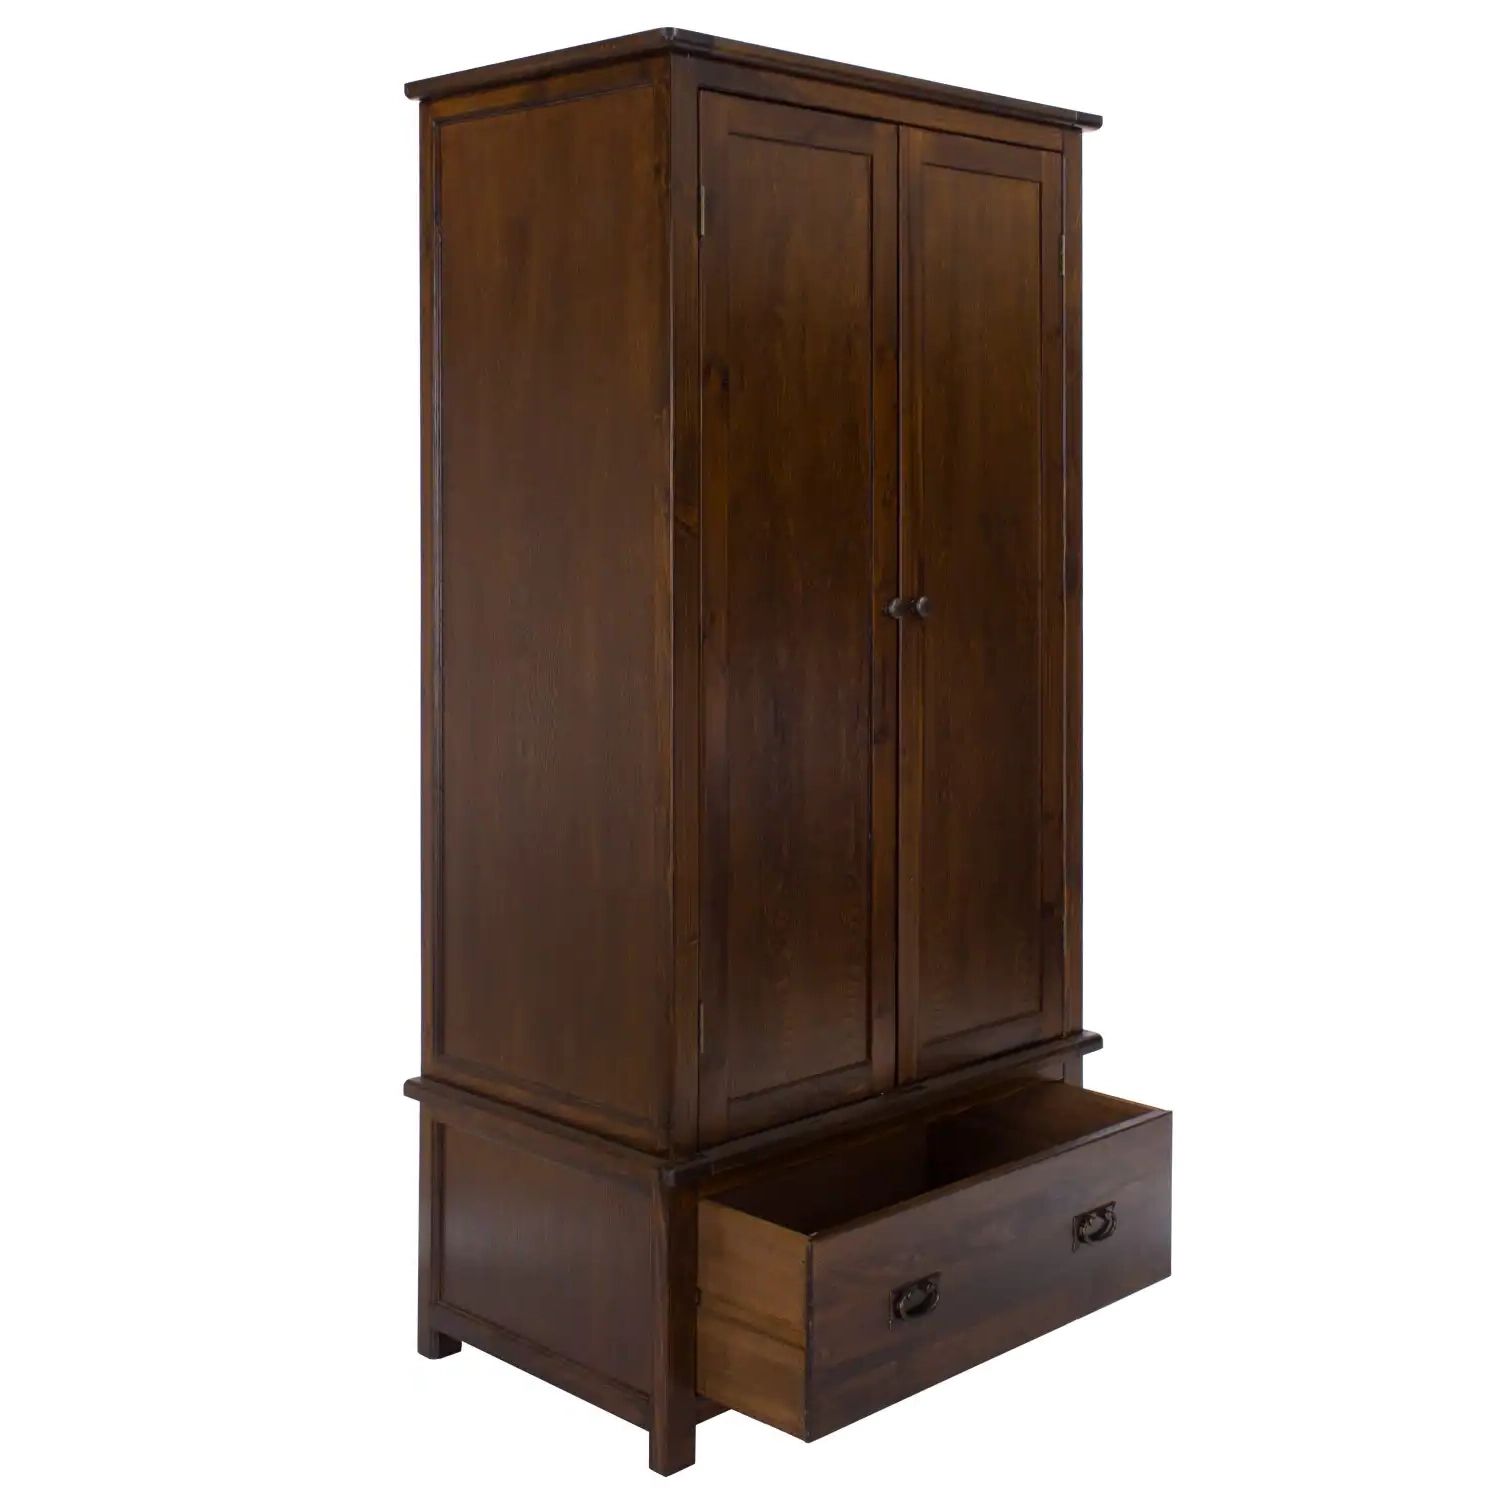 Dark Wood Double Wardrobe 2 Doors 1 Drawer 190cm Tall 90cm Wide – Home  Living Throughout Dark Wood Wardrobes With Drawers (Gallery 6 of 20)